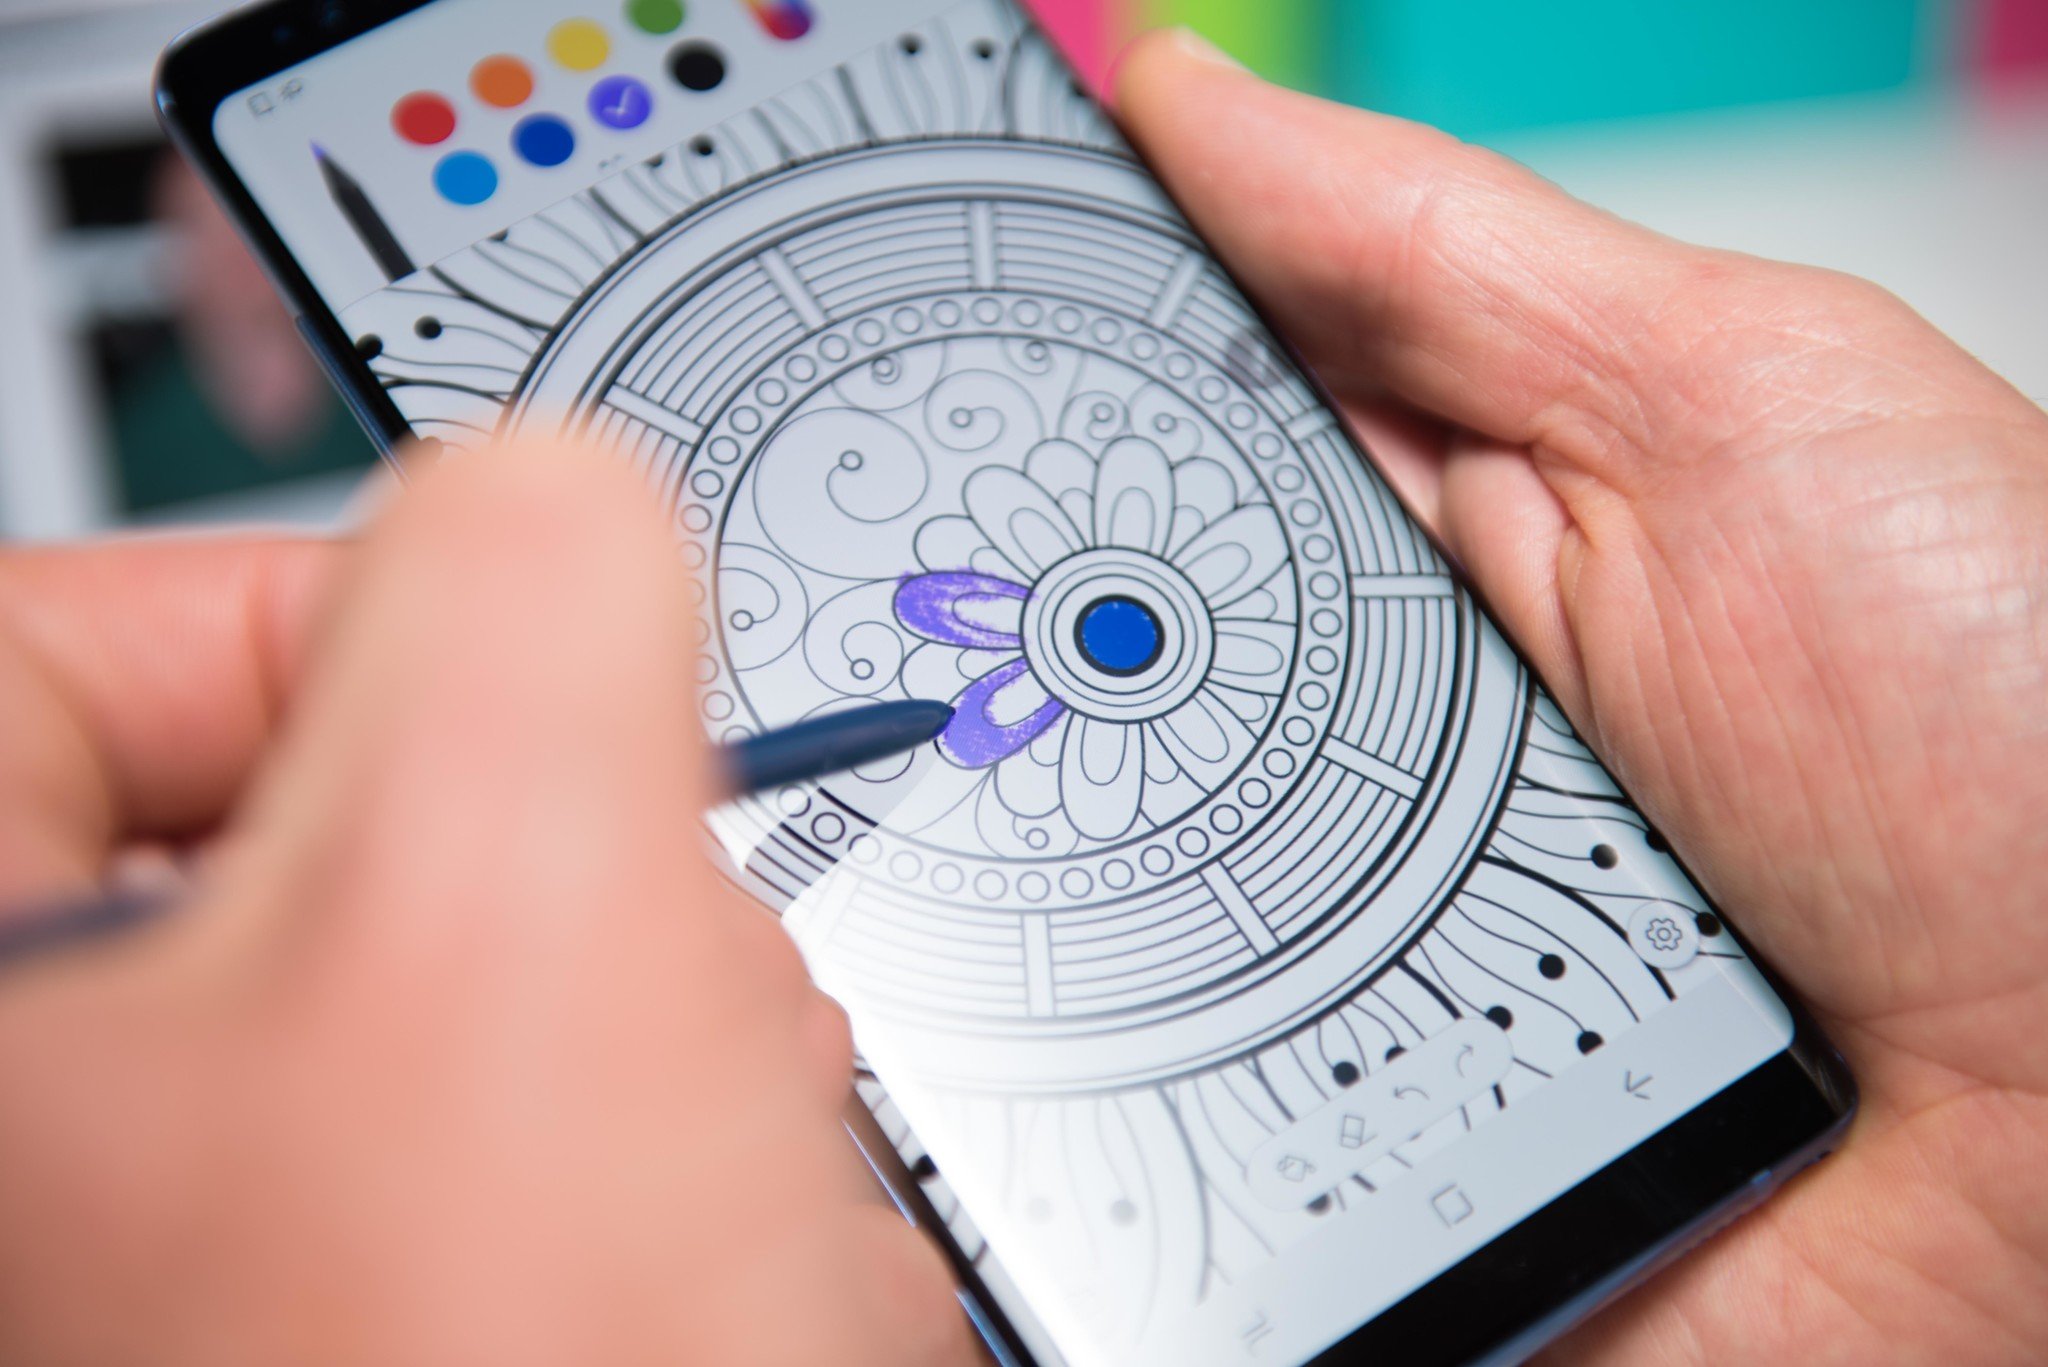 How To Use The Coloring Feature On The Galaxy Note 8 Android Central